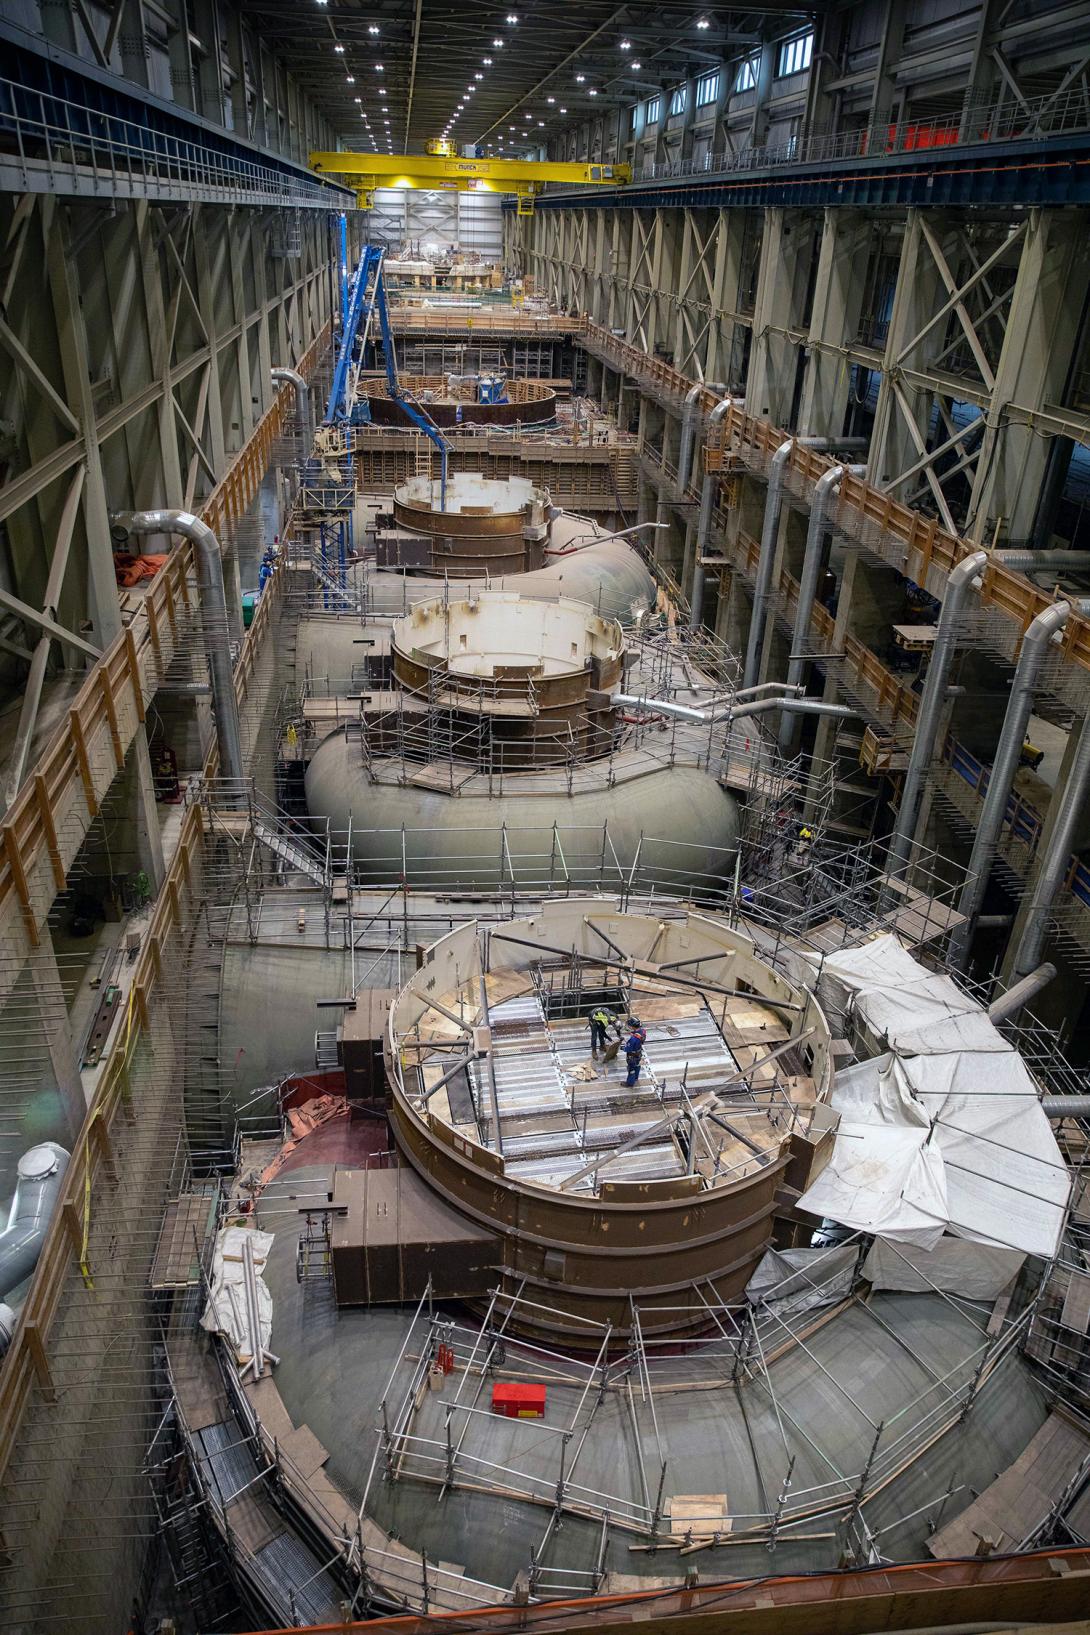 Spiral case units in the powerhouse. | November 2022